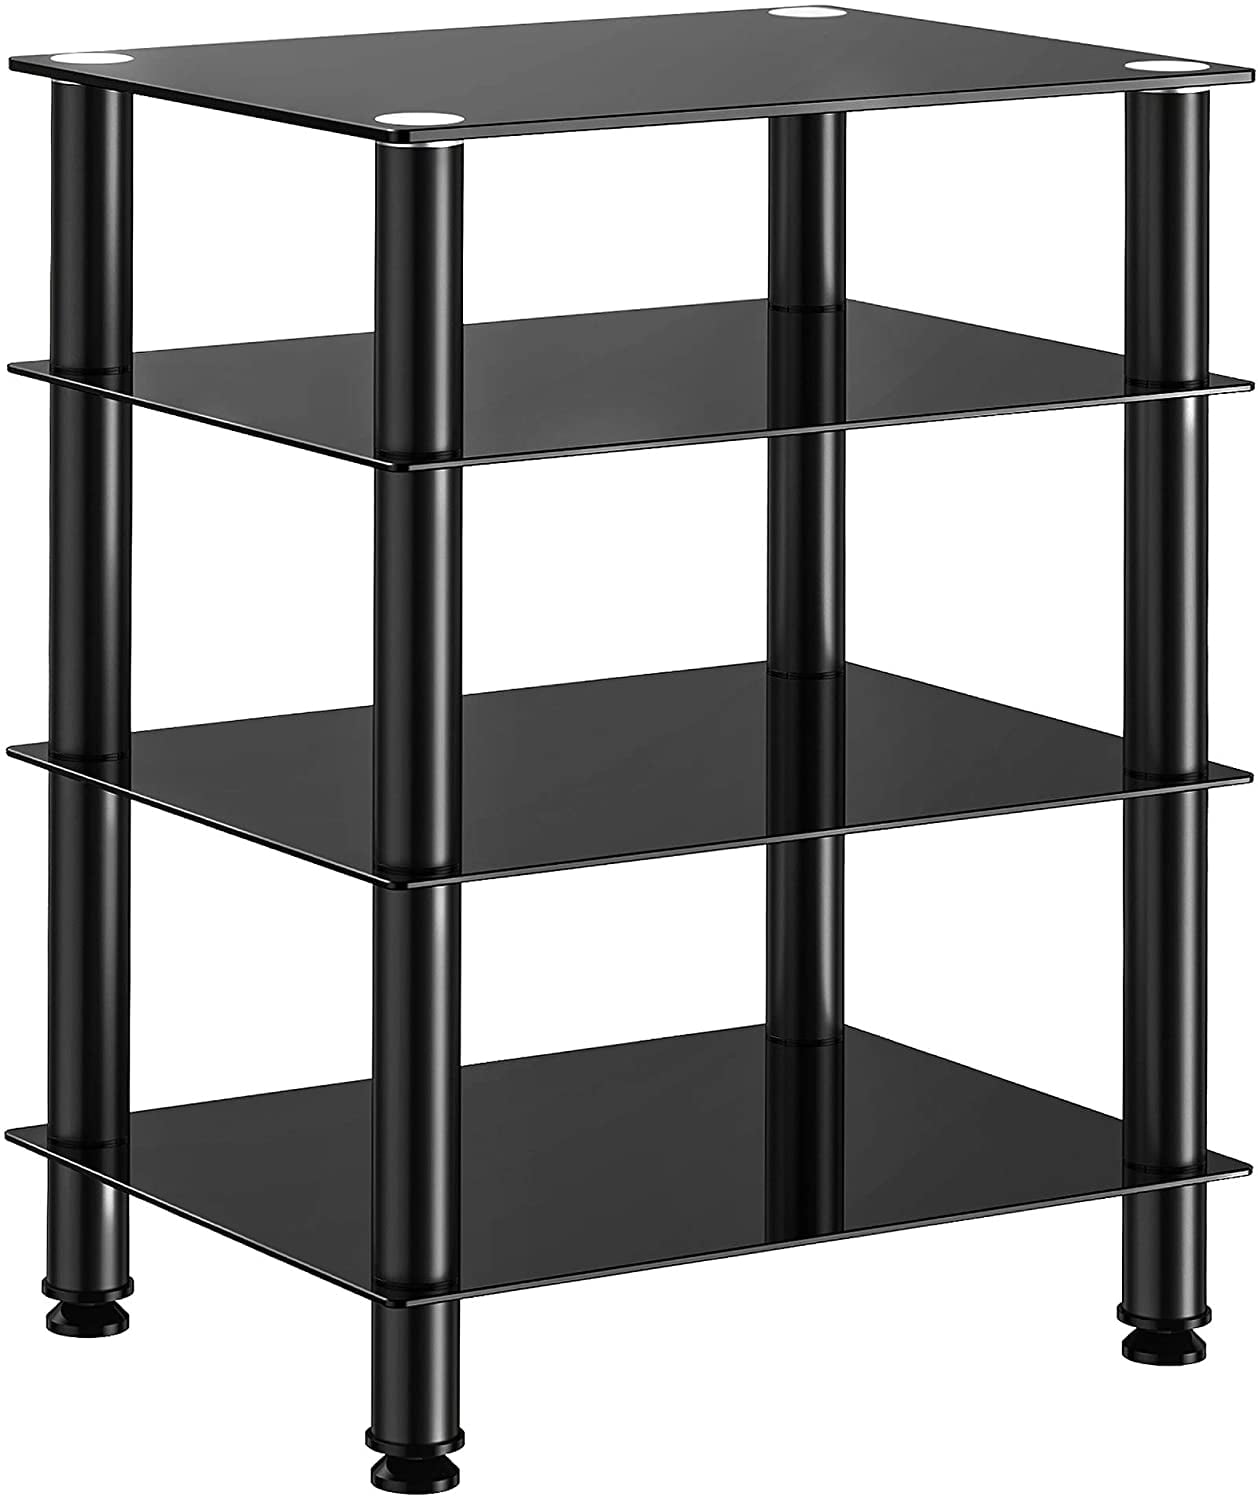 Video Component Stand TV Audio Stereo Cabinet Media Entertainment Center 4-Shelf 